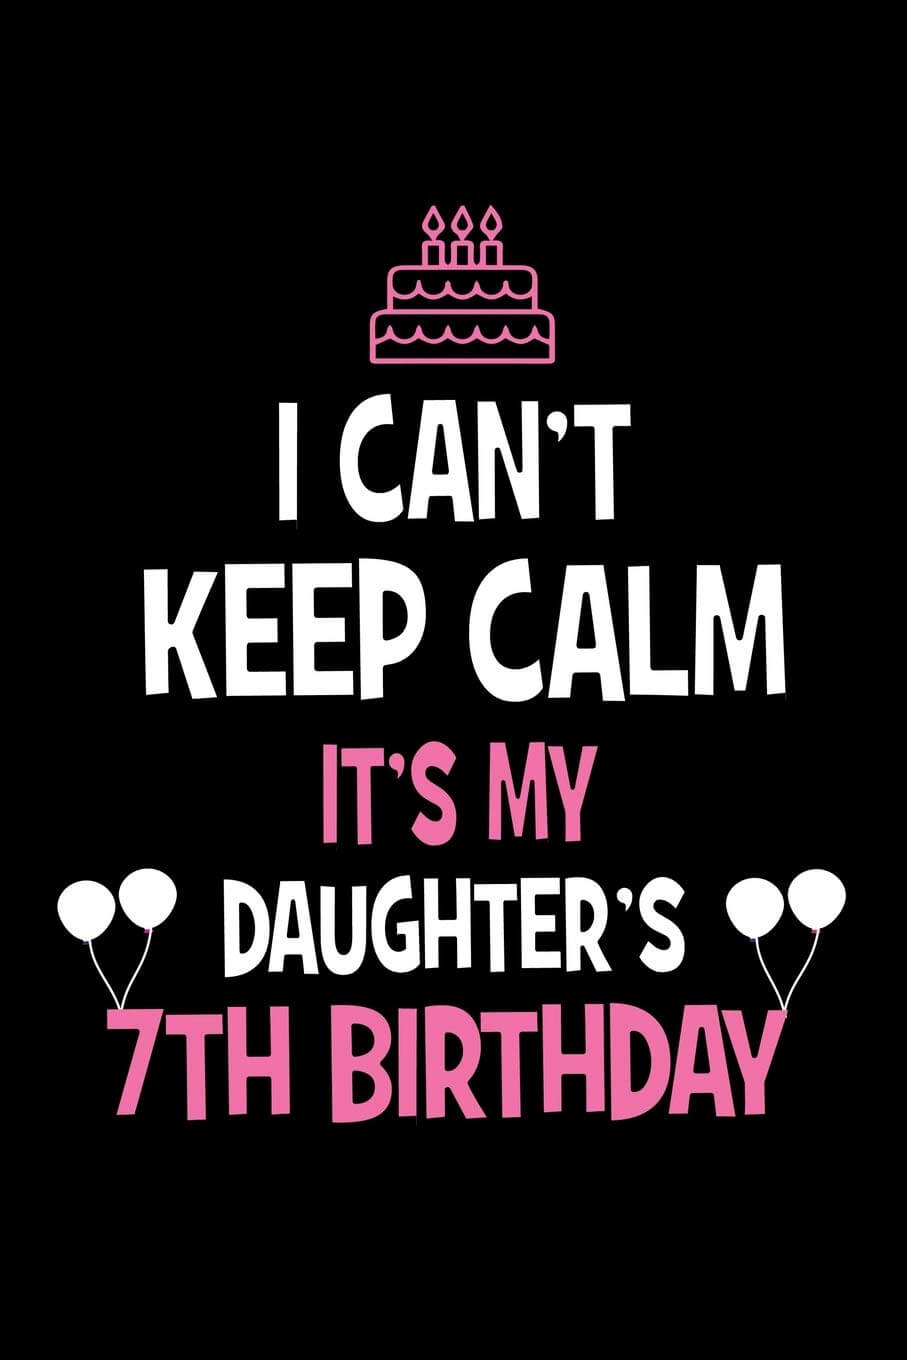 7th Birthday Wishes For Daughter - Printable Templates Free